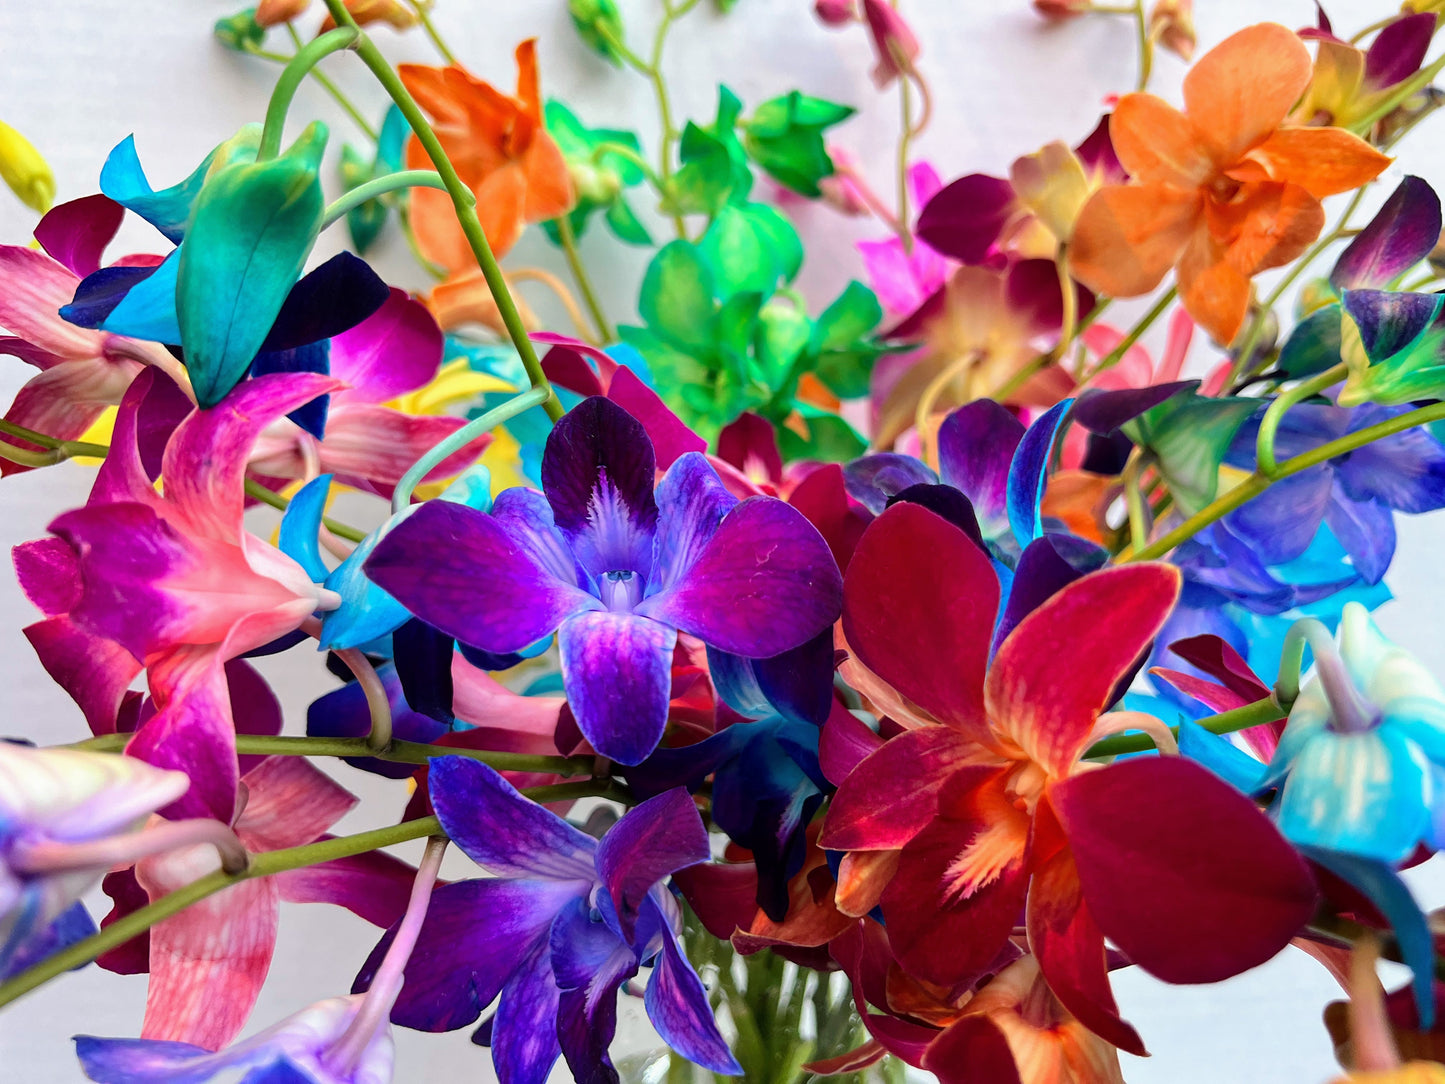 Prebook 100 Rainbow Sonia Dyed Bless Fresh Cut Dendrobium Orchid Loose Bloom